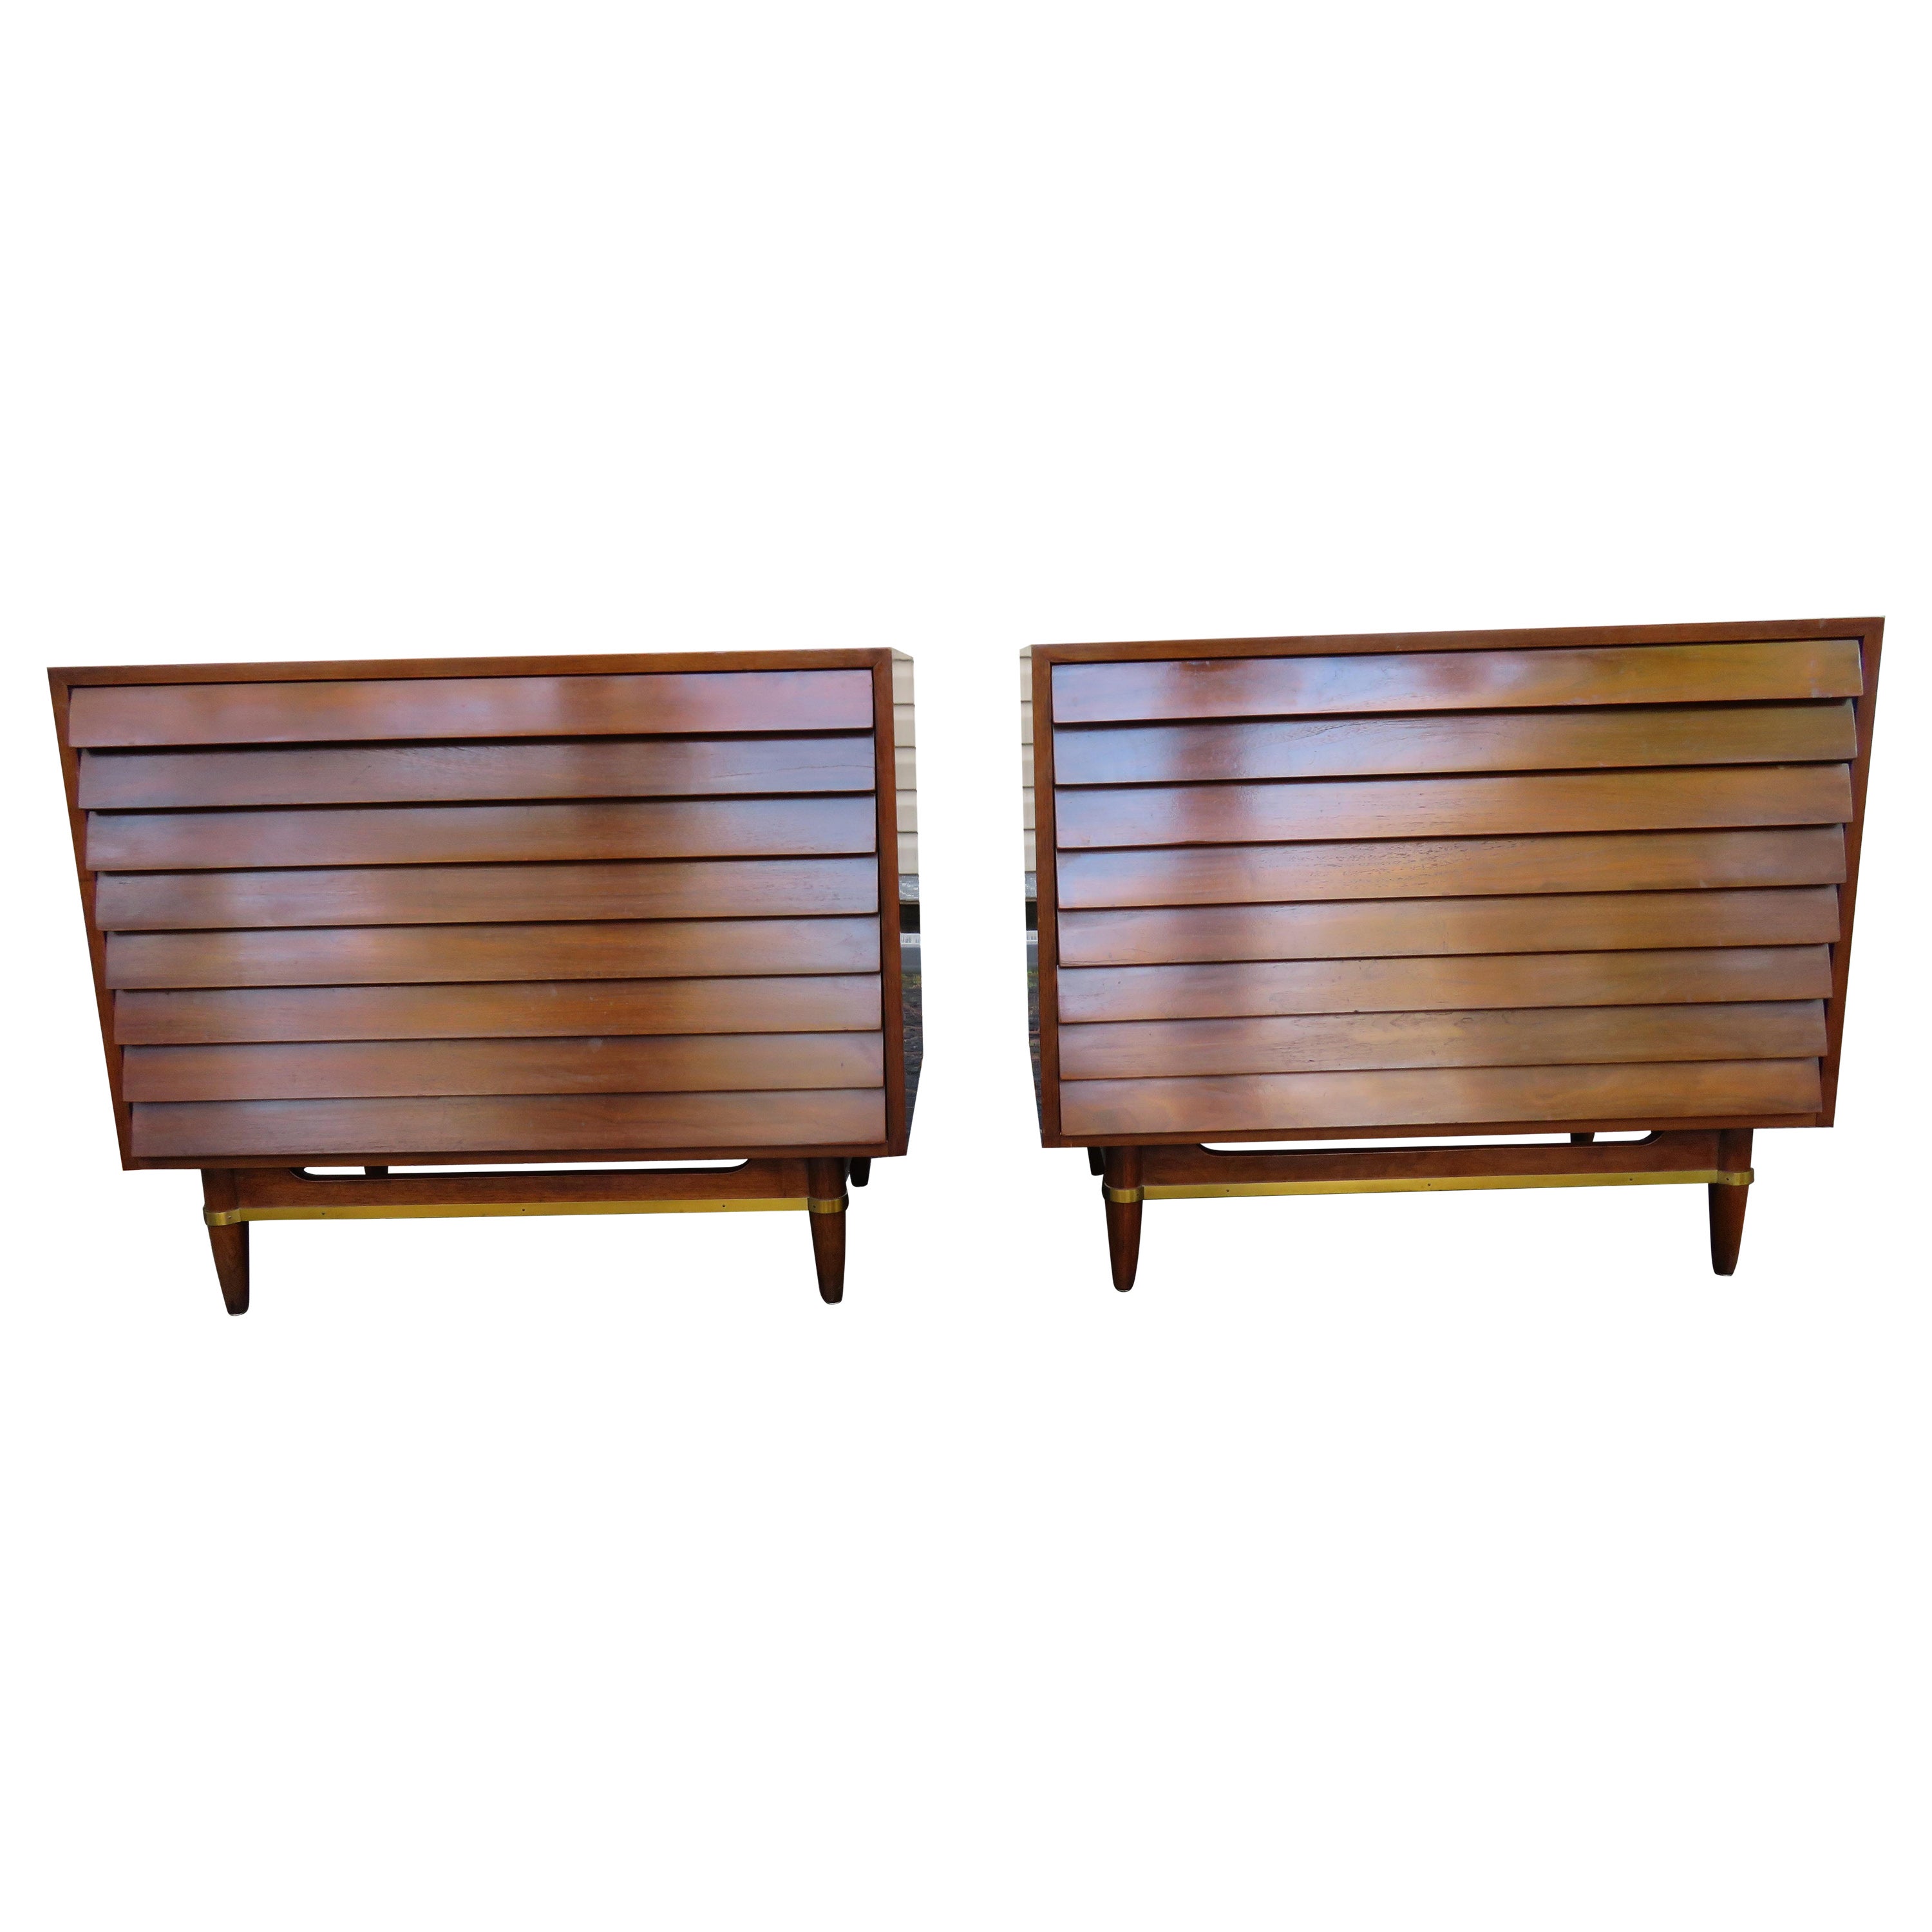 Handsome Pair of American of Martinsville Walnut Brass Louvered Bachelors Chests